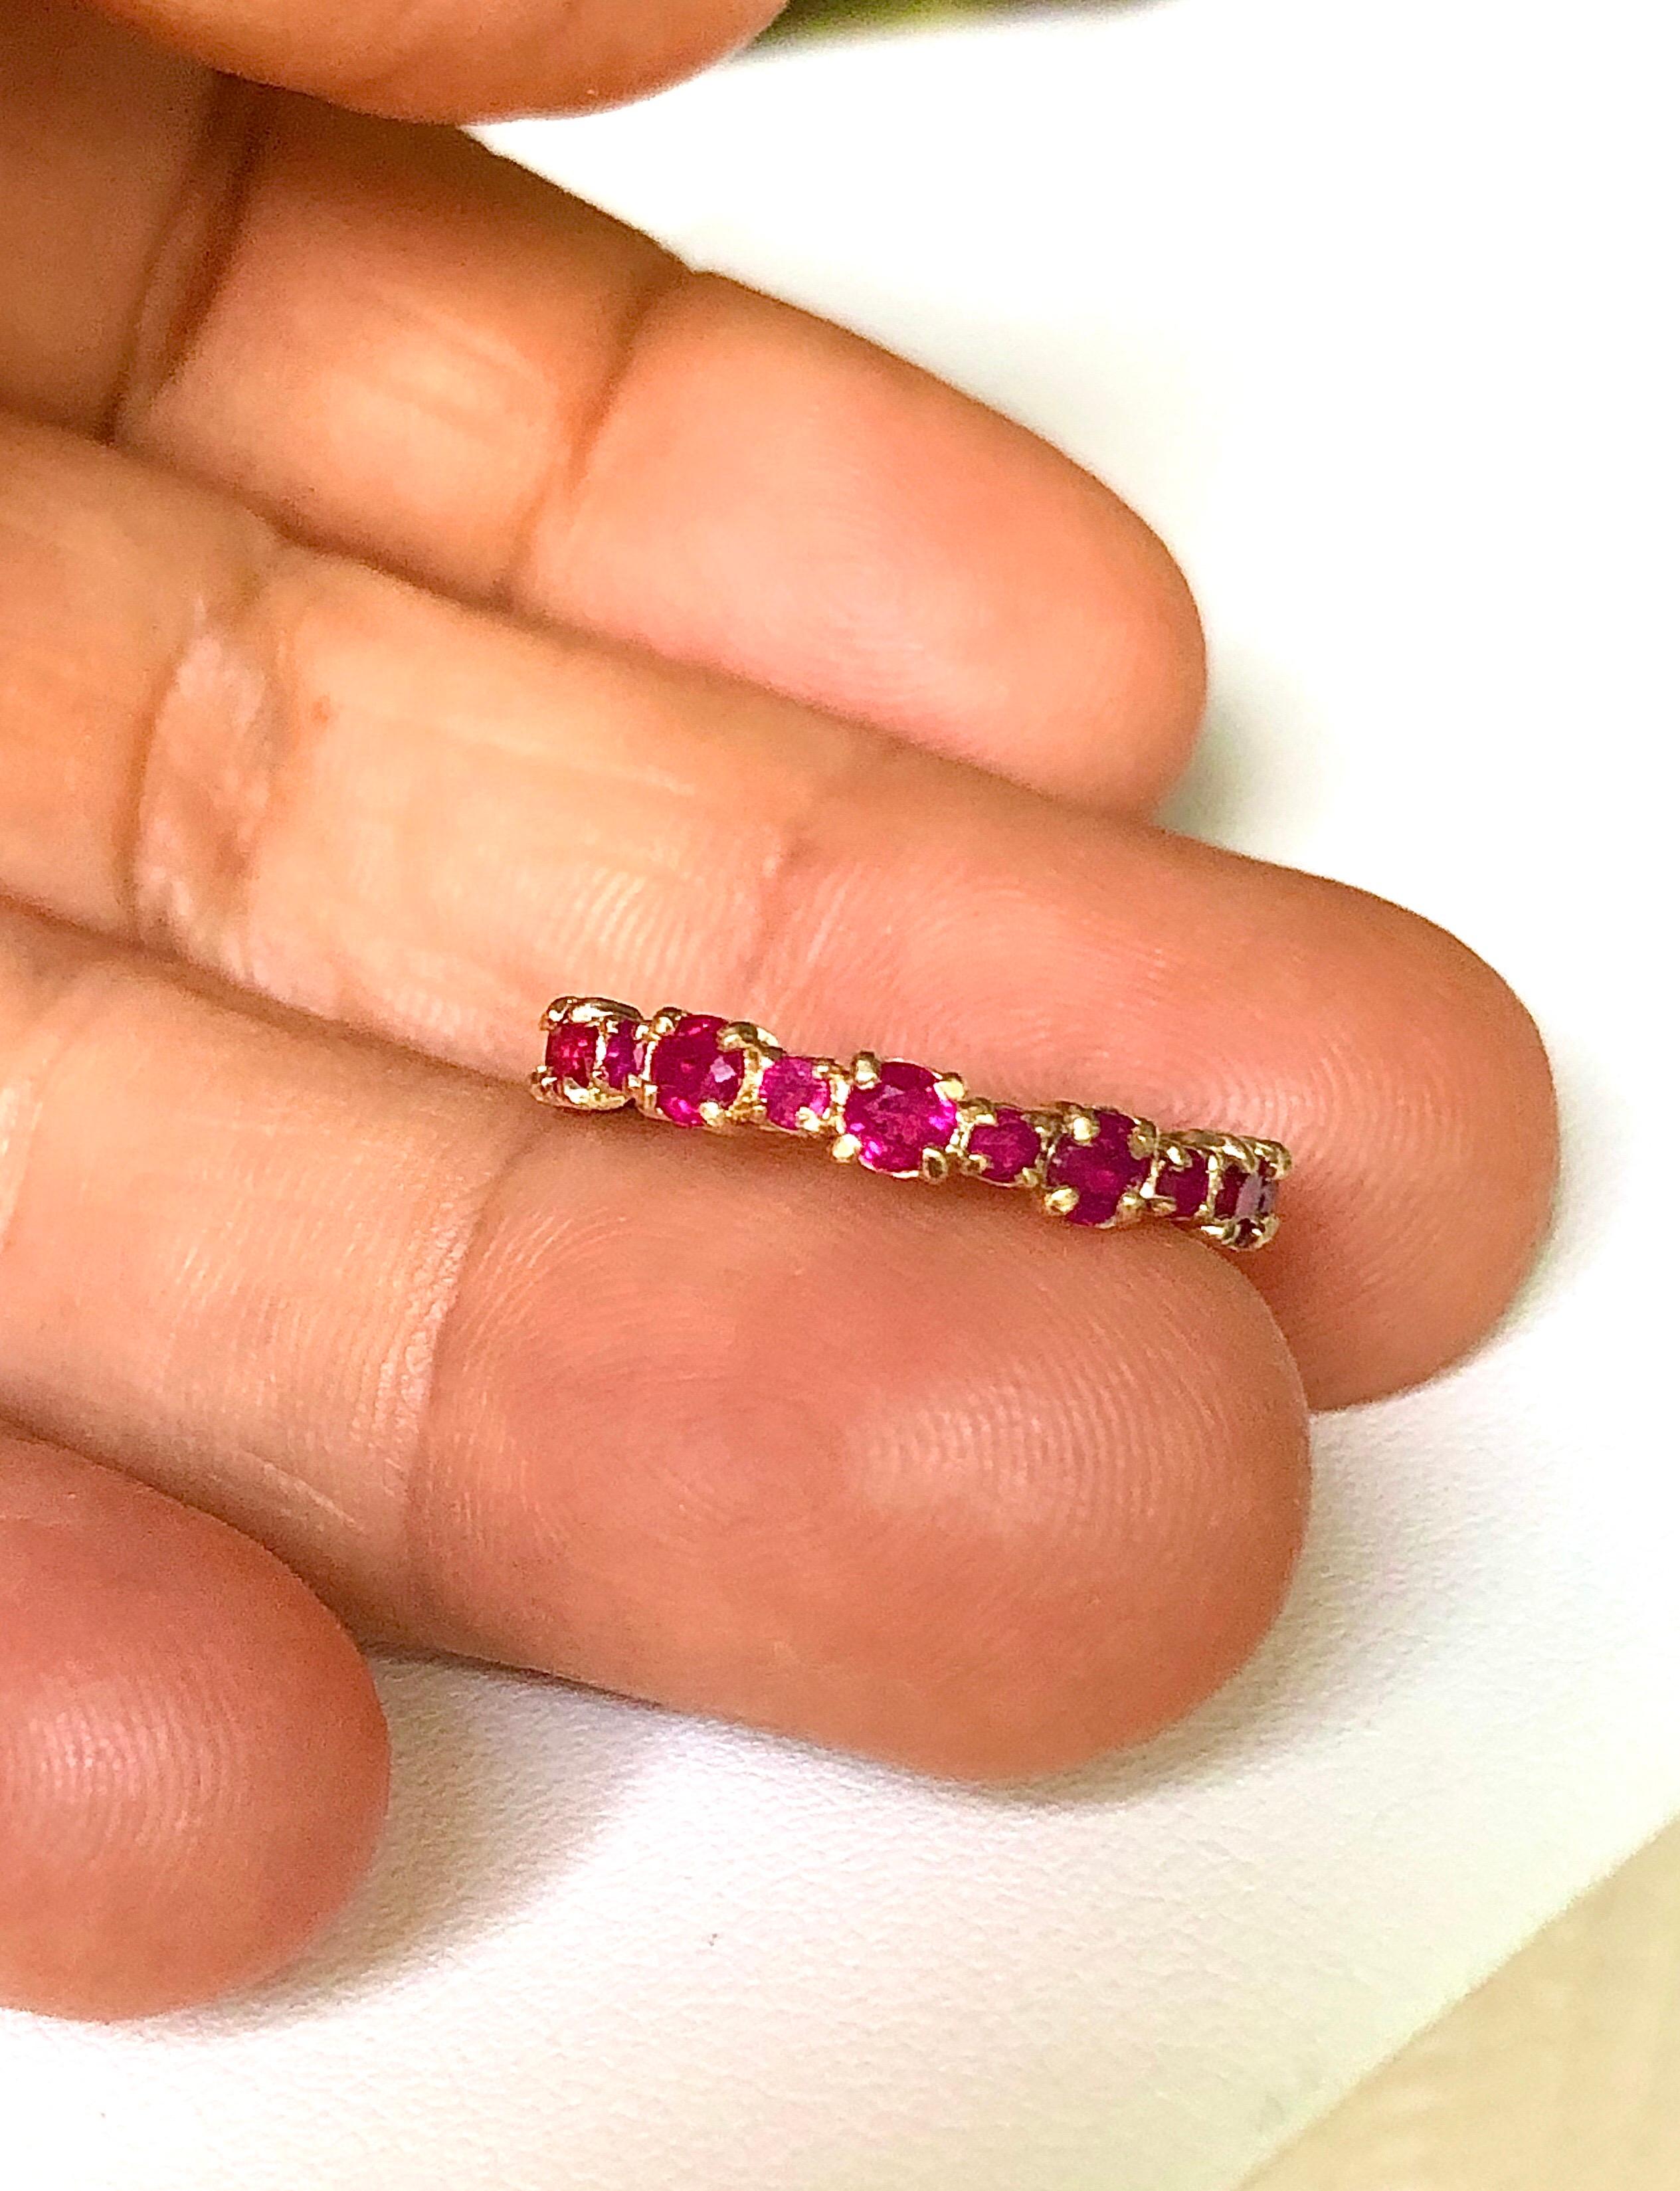 Engagement Eternity Ruby Gold Band Ring Beautifully made ruby eternity band. 26 round cut rubies weigh a total of 2.0 carats. The band is 3.2mm wide. The band is made of 14K yellow gold. US size 7.5
Comments: This ring is sold out. A custom-made